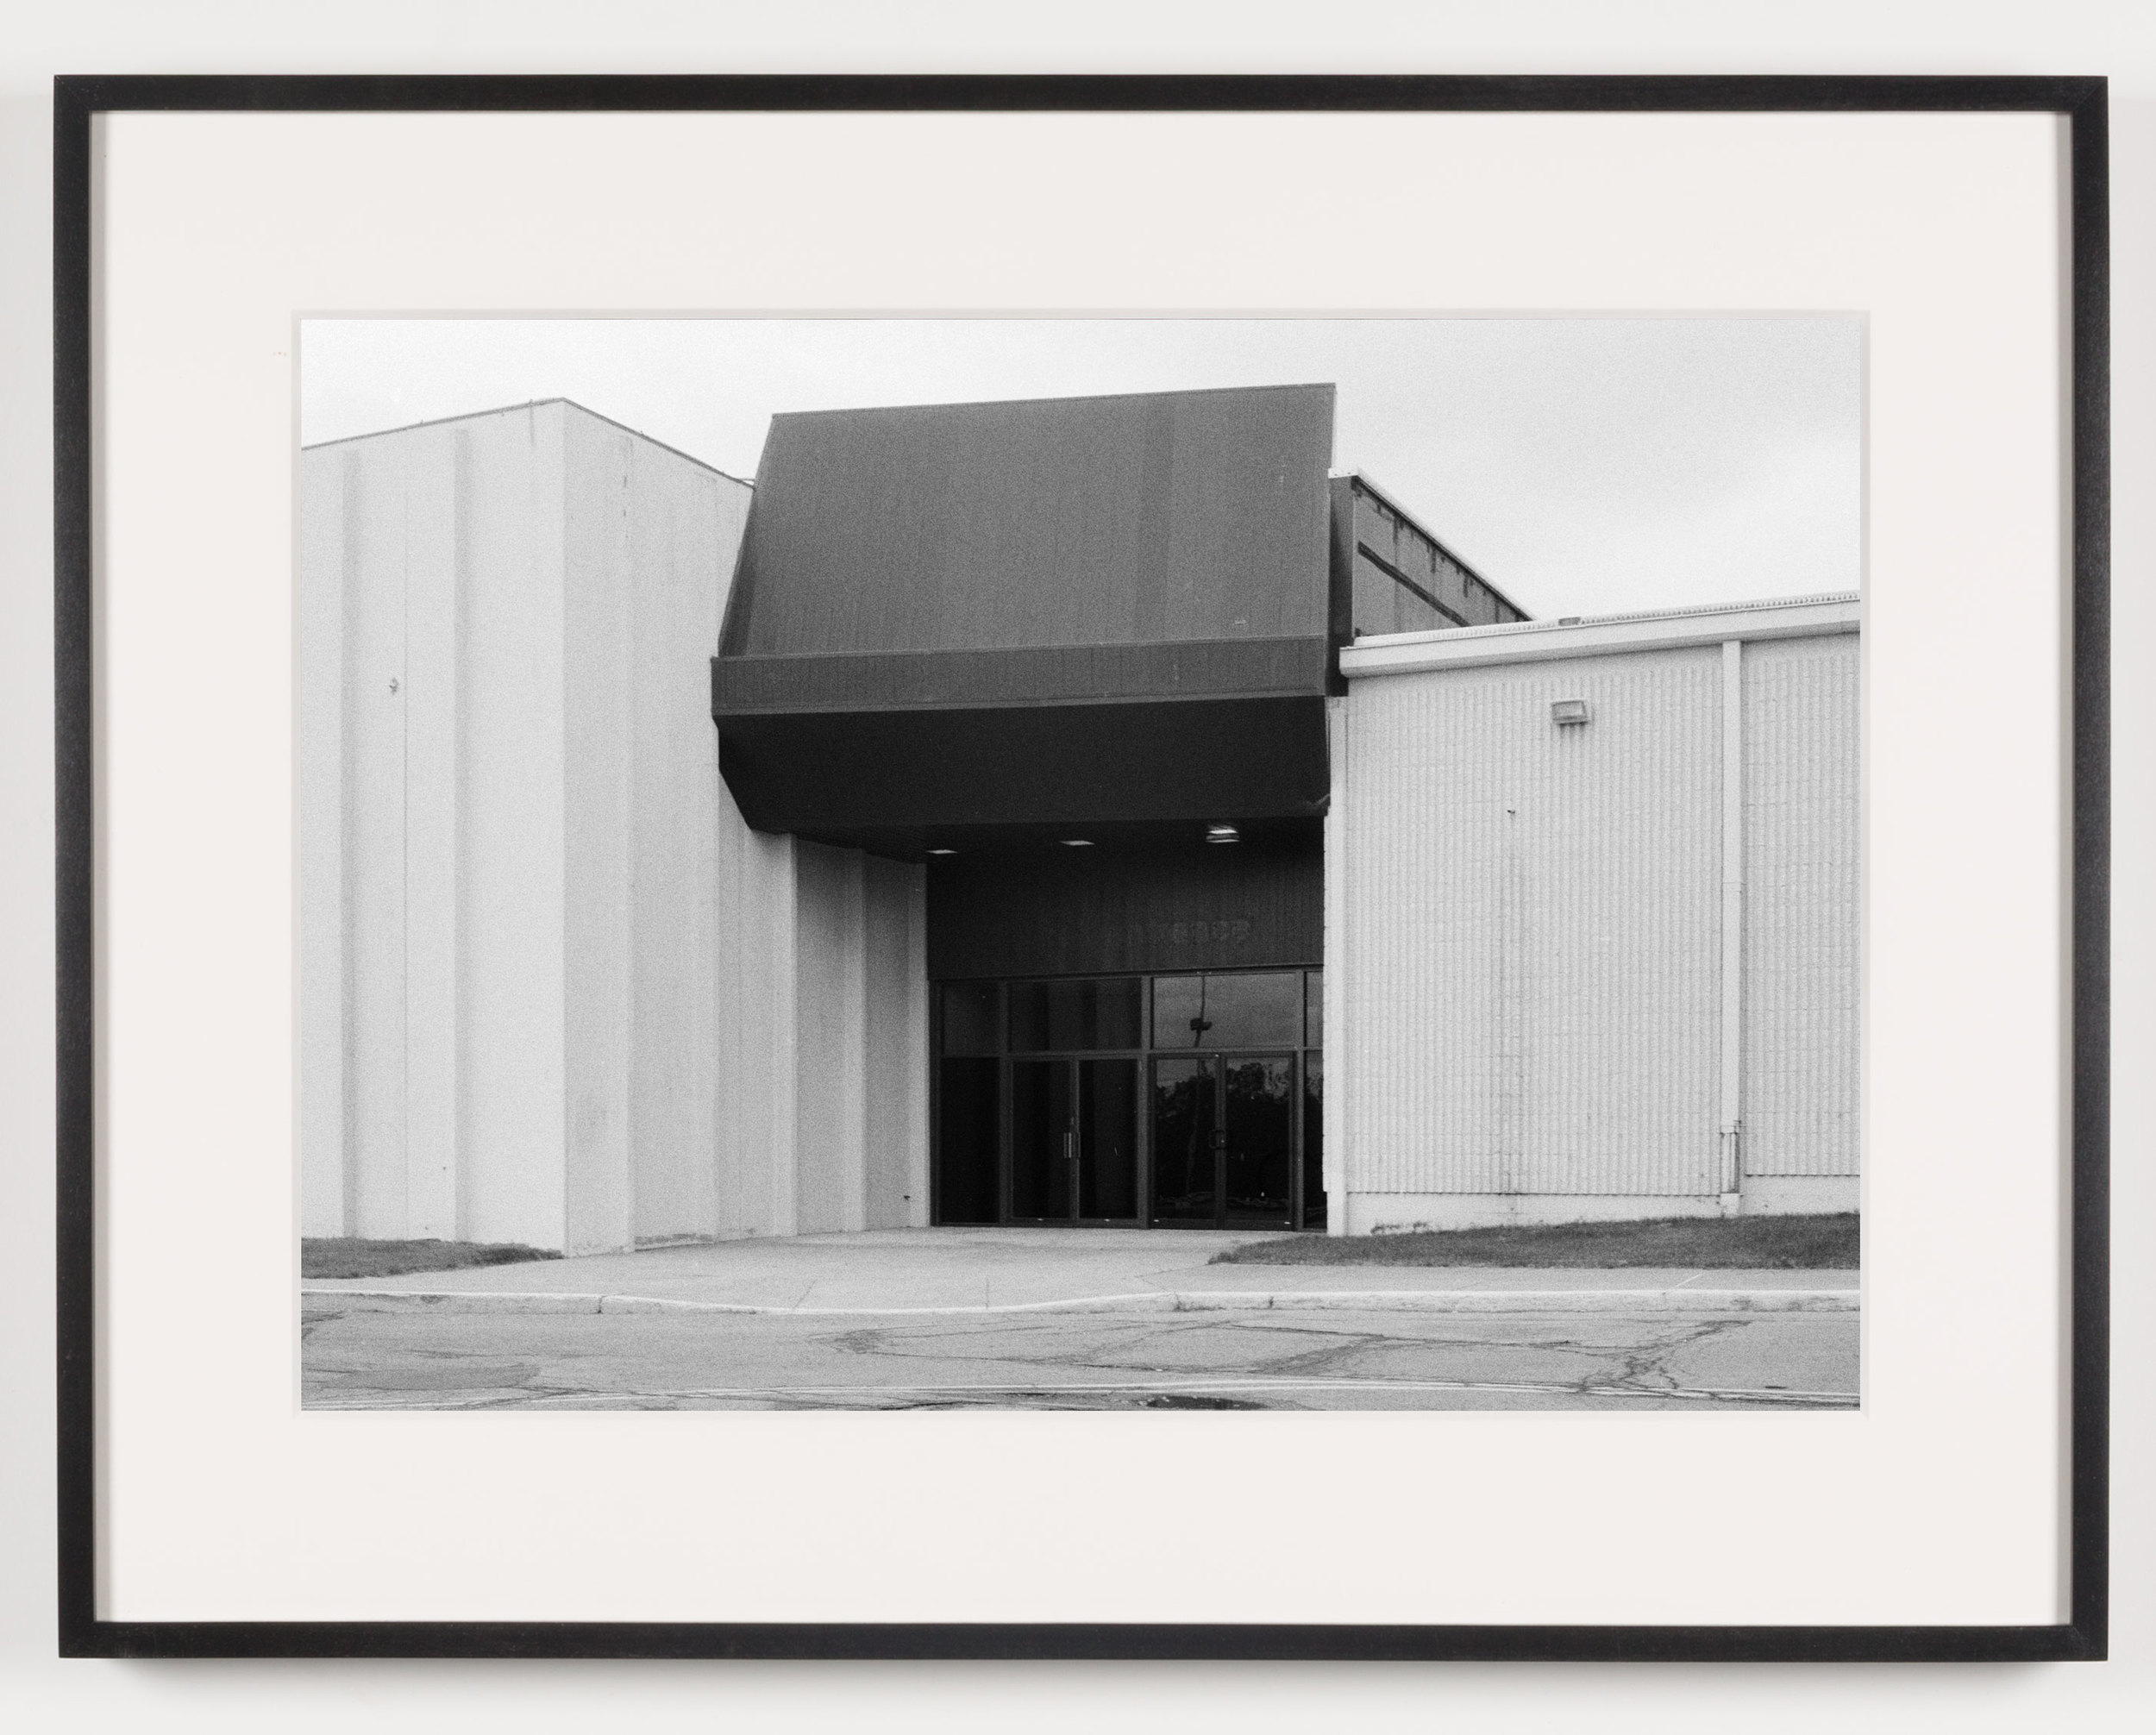   Midway Mall (View of Exterior), Elyria, OH, Est. 1965    2011   Epson Ultrachrome K3 archival ink jet print on Hahnemühle Photo Rag paper  21 5/8 x 28 1/8 inches   American Passages, 2001–2011     